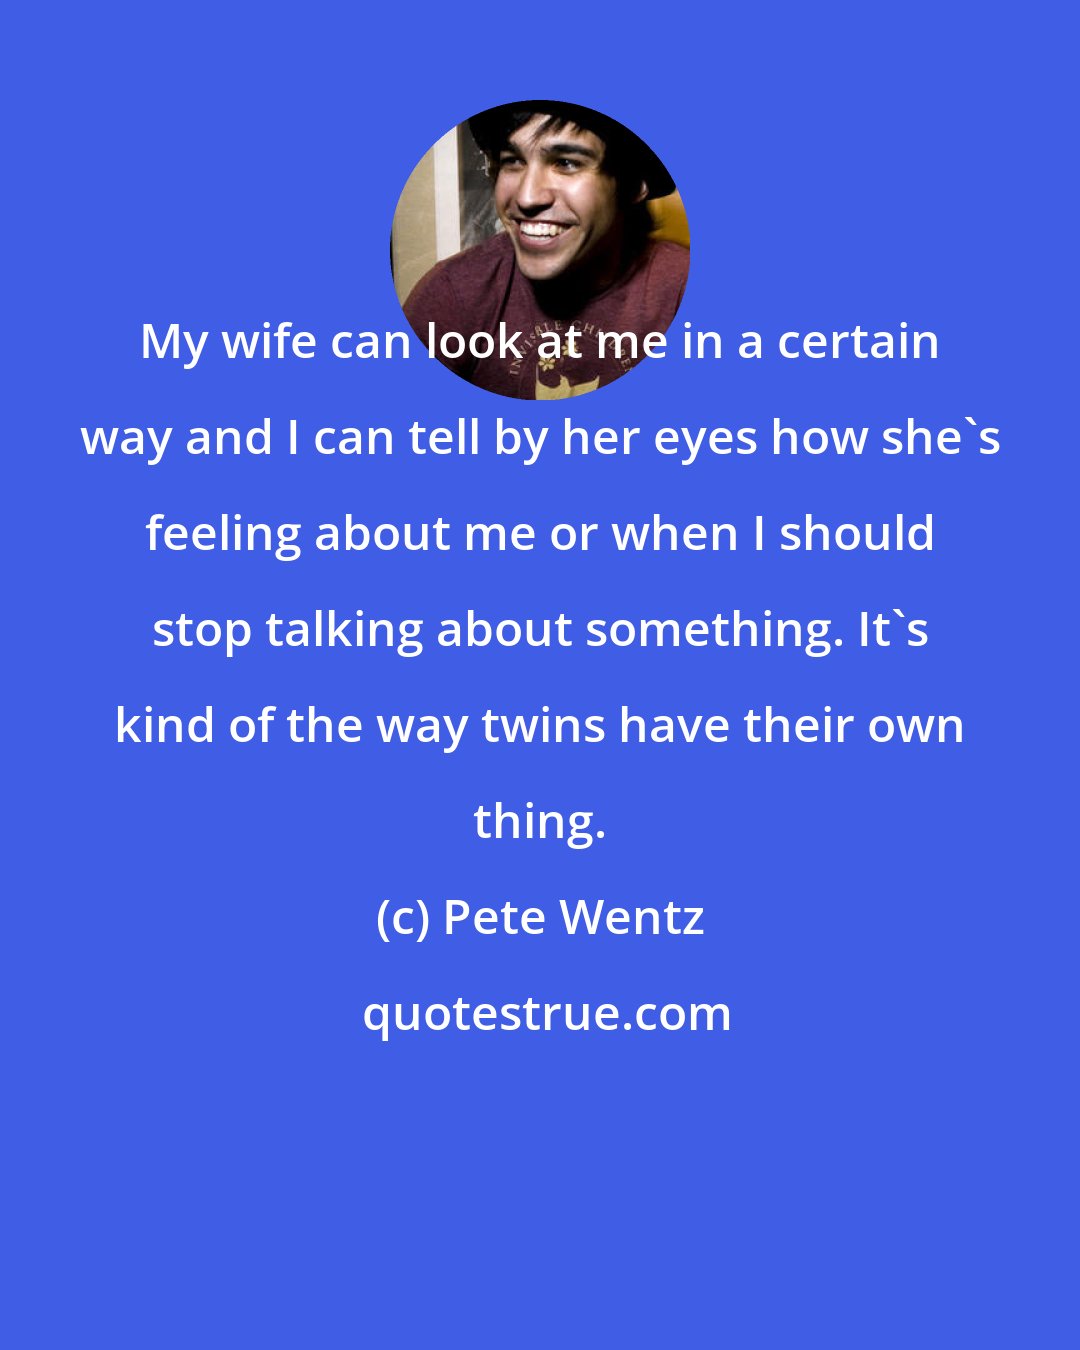 Pete Wentz: My wife can look at me in a certain way and I can tell by her eyes how she's feeling about me or when I should stop talking about something. It's kind of the way twins have their own thing.